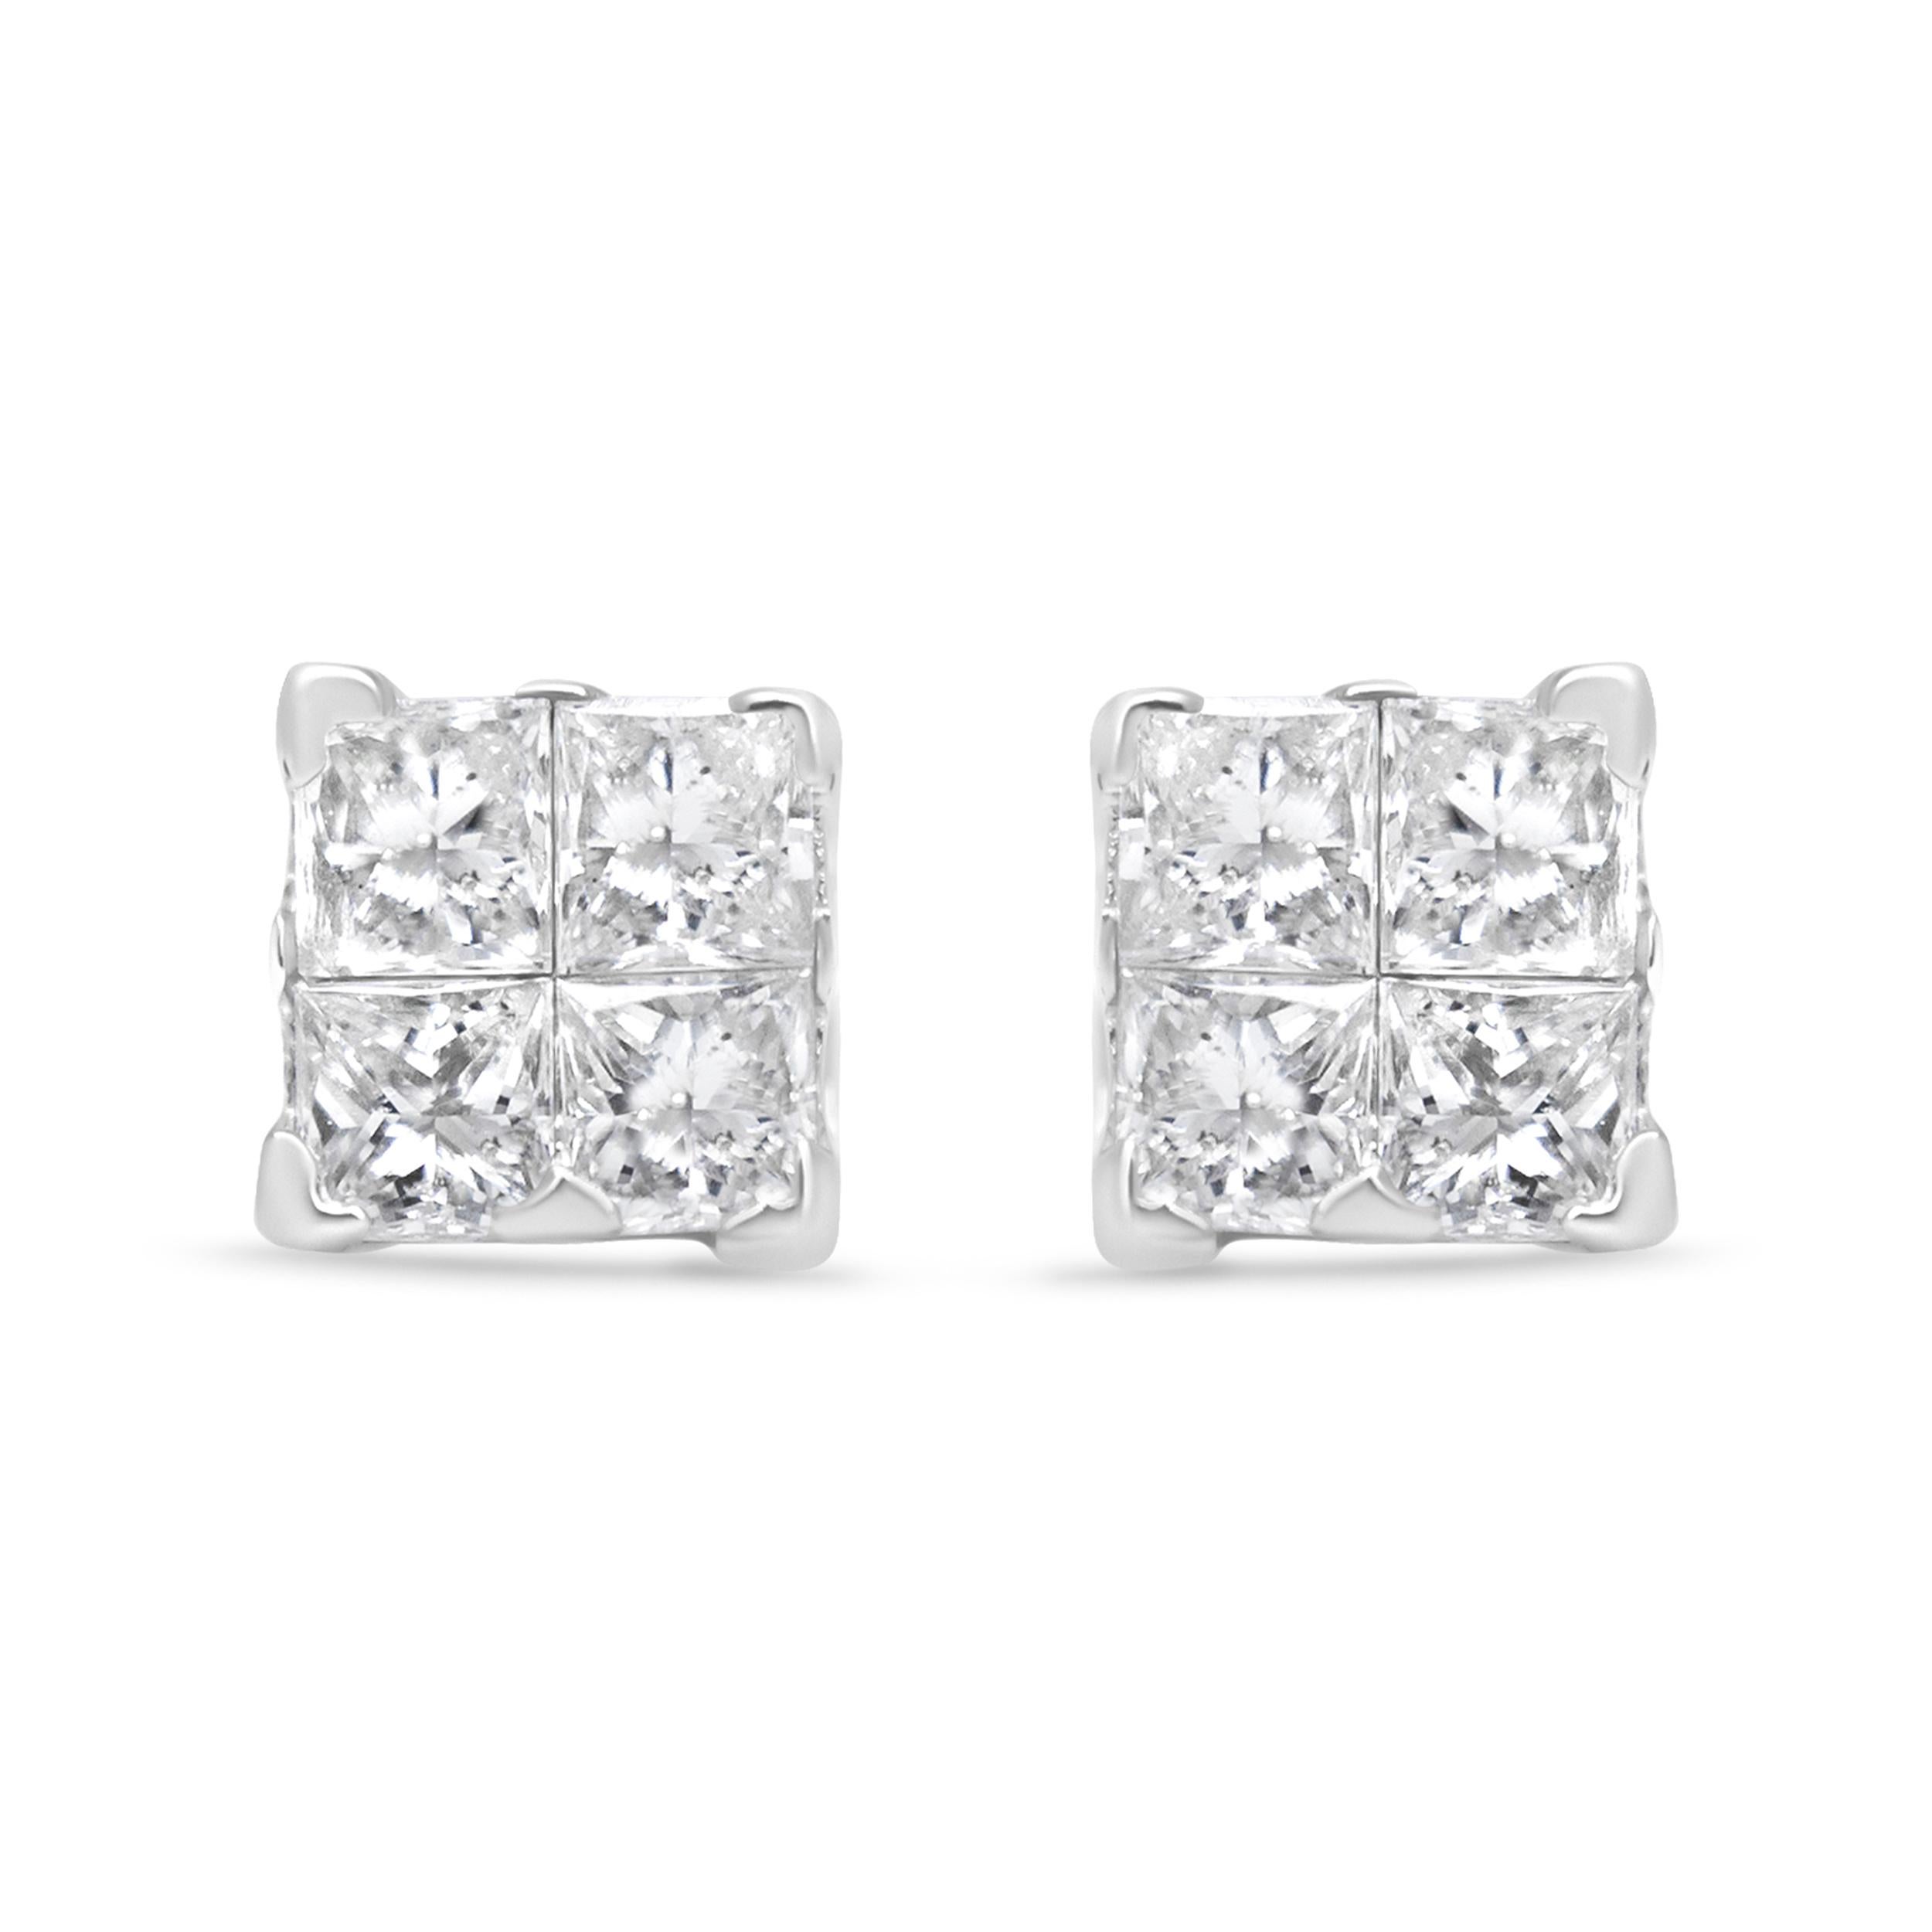 Celebrate a special moment with these exquisite quad diamond composite stud earrings made of genuine .925 sterling silver. This pair of four-diamond composite stud earrings features a cluster of four princess cut diamonds on each stud for a total of